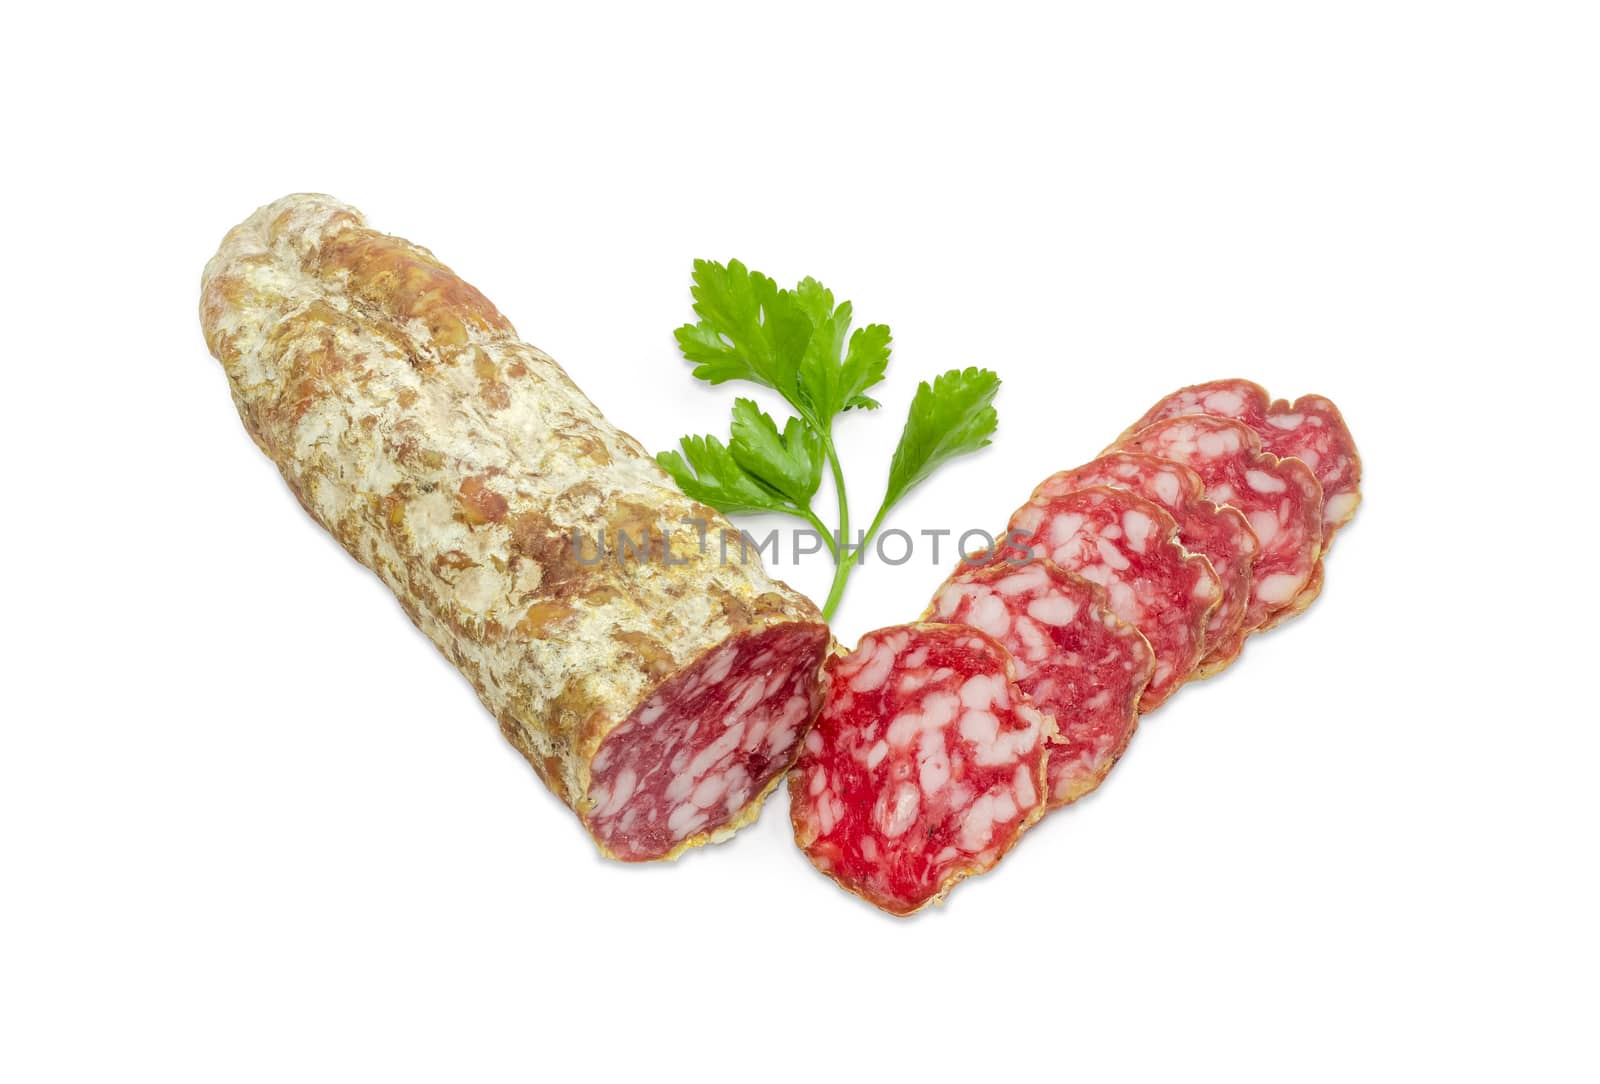 Partly sliced salami and twig of parsley on a light background
